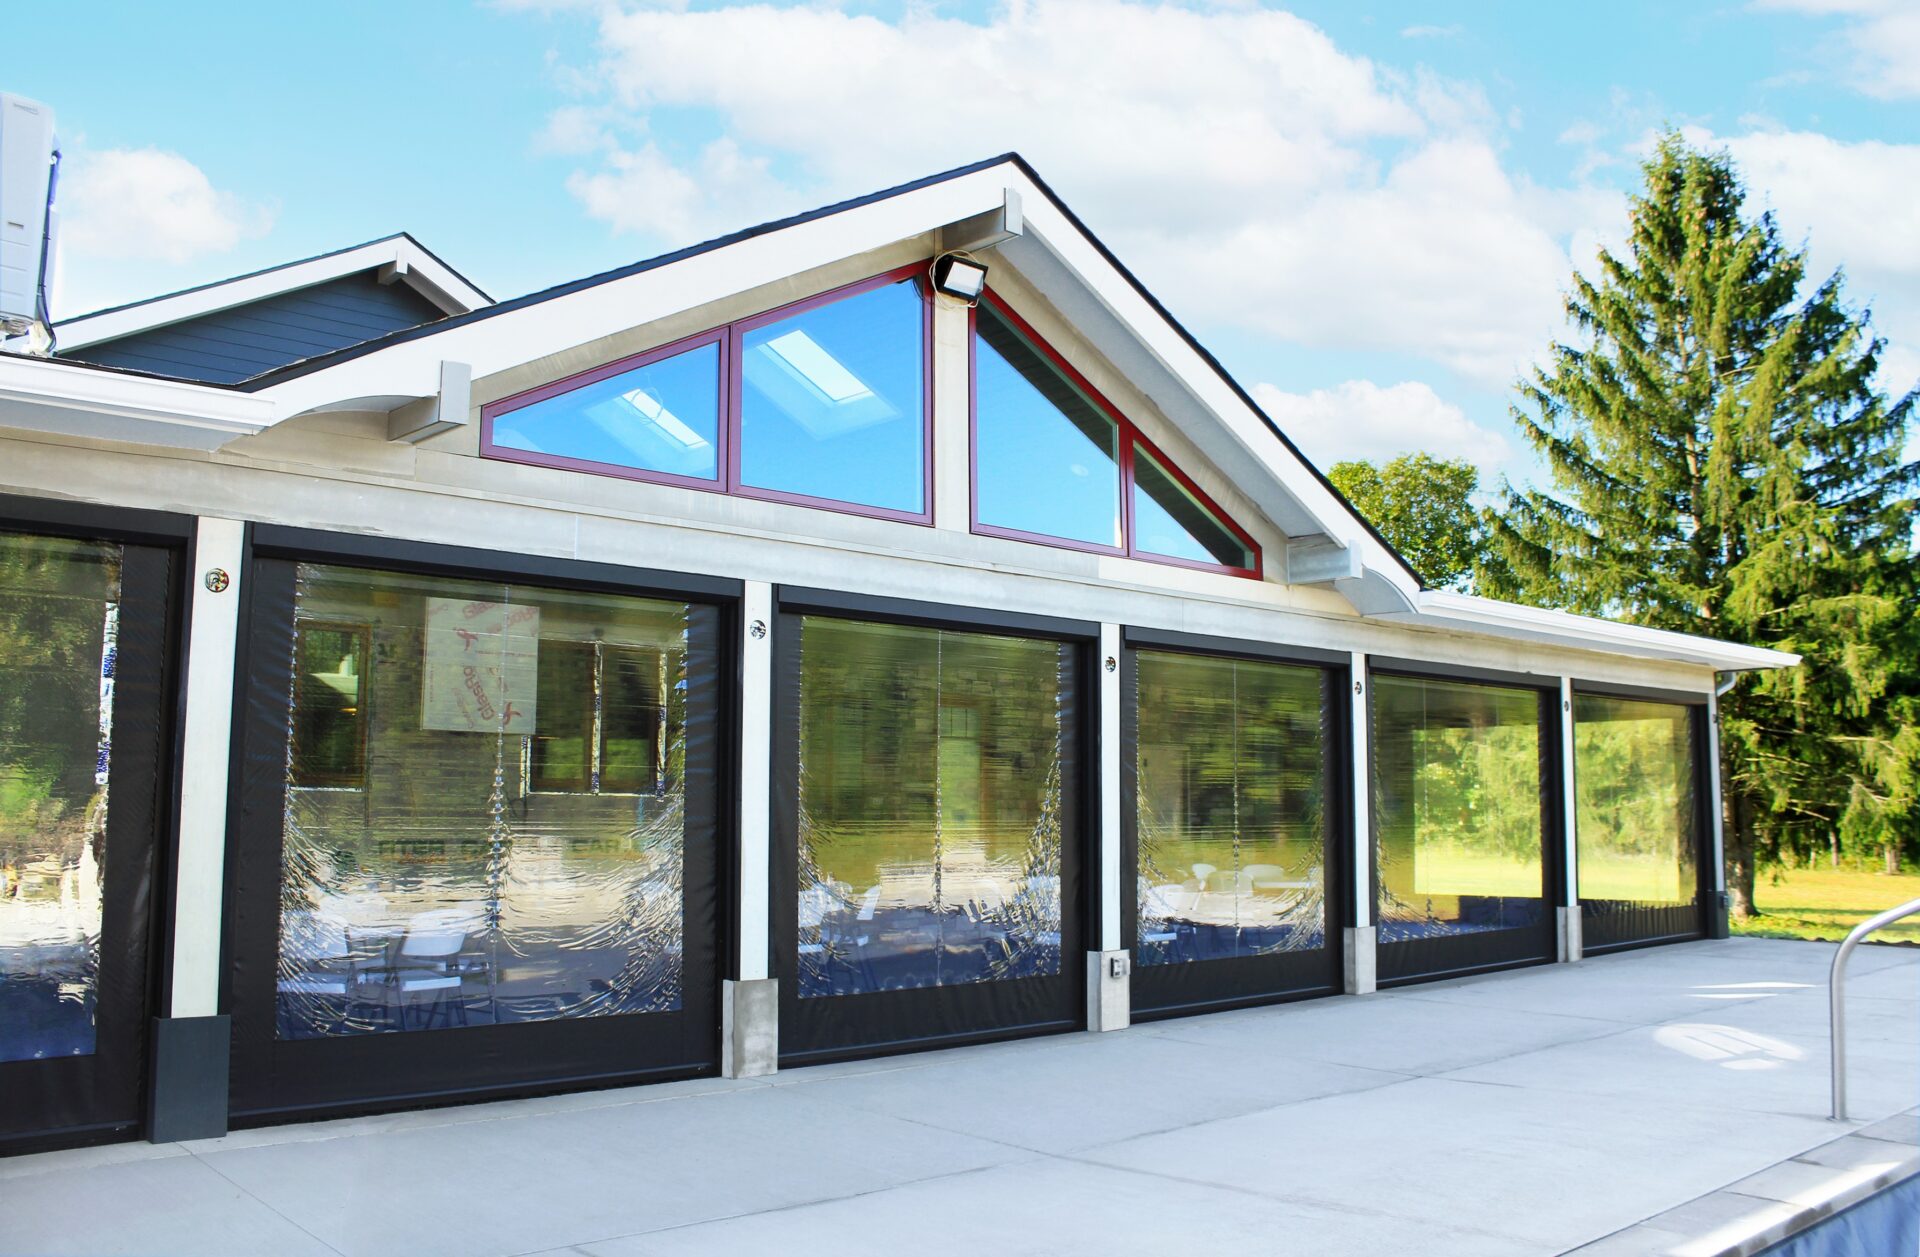 Screening Solutions Ohio transforms this outdoor patio into a four season room with Phantom Retractable Vinyl. With the touch of a button, Phantom’s Clear Vinyl will retain heat while keeping out the elements, allowing you to enjoy your porch all year long.